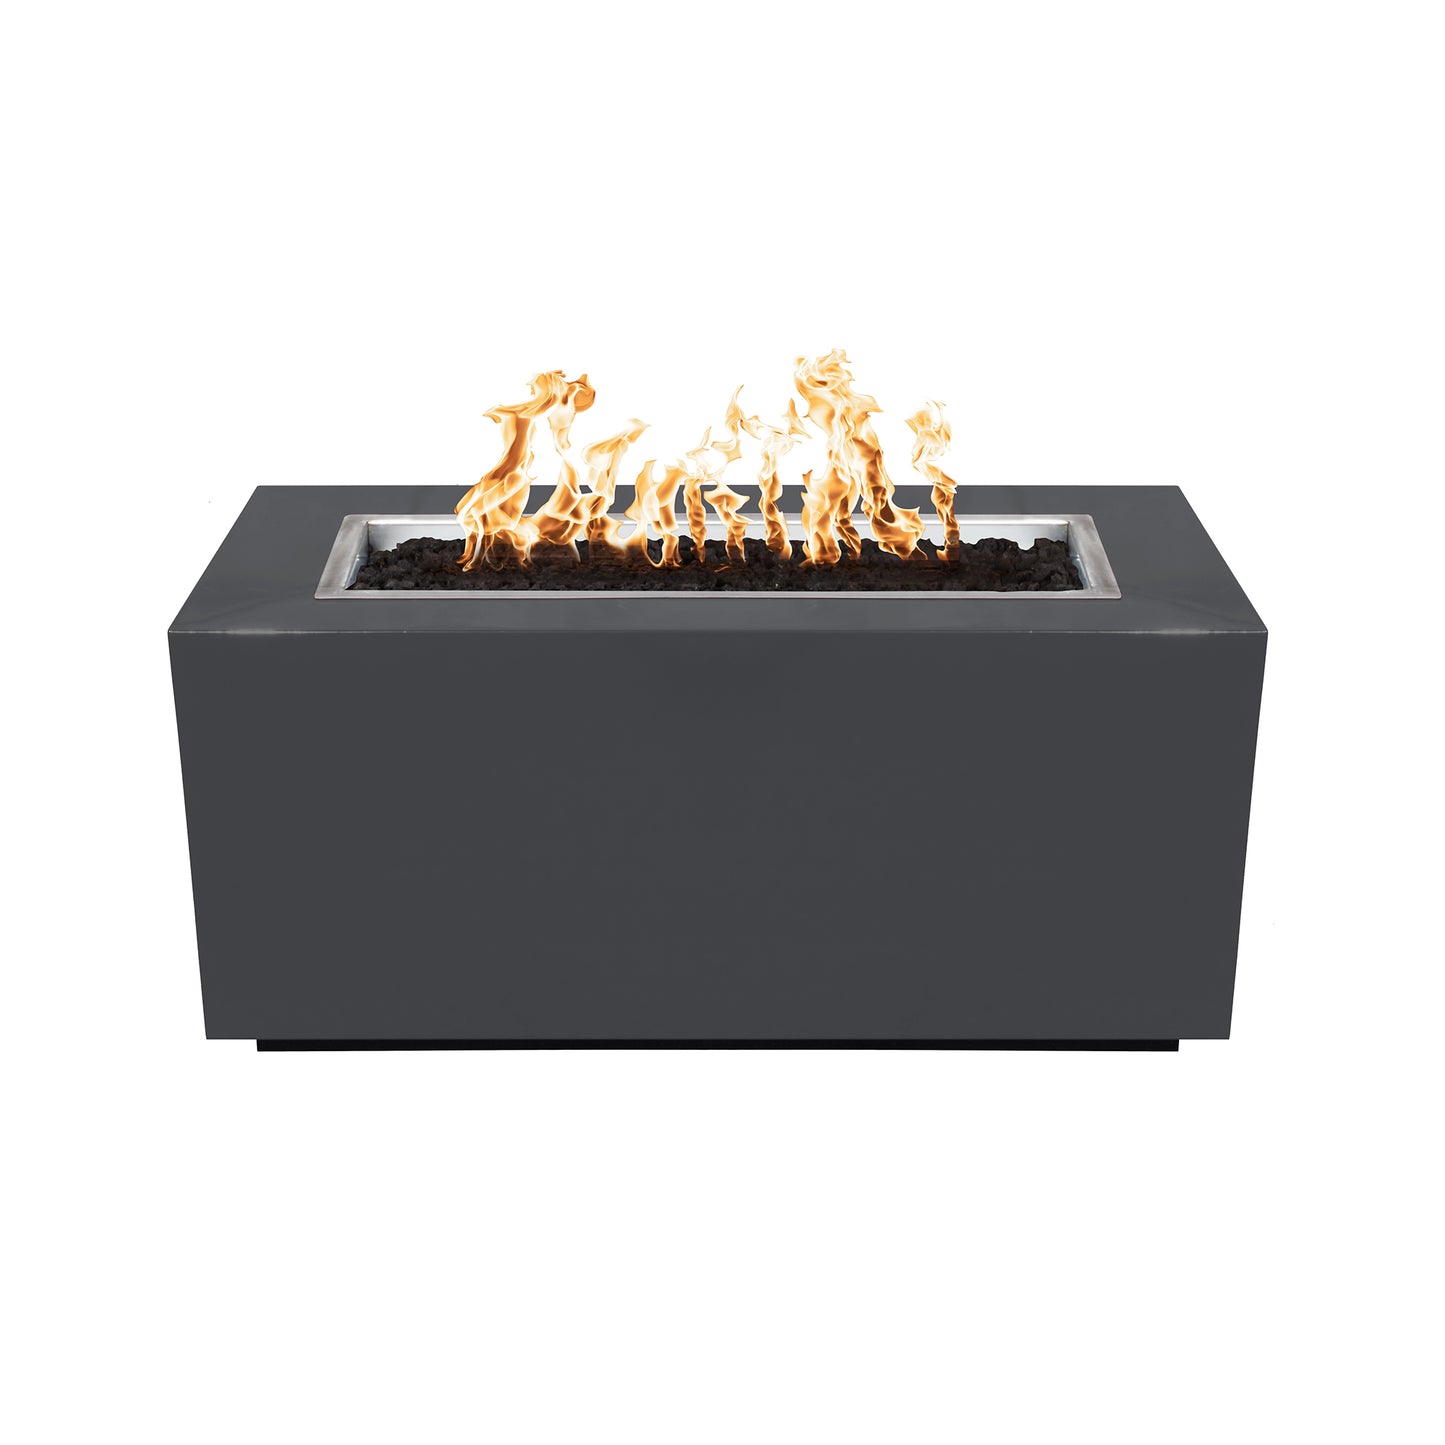 Pismo Metal Fire Pit 72" - Electronic Ignition